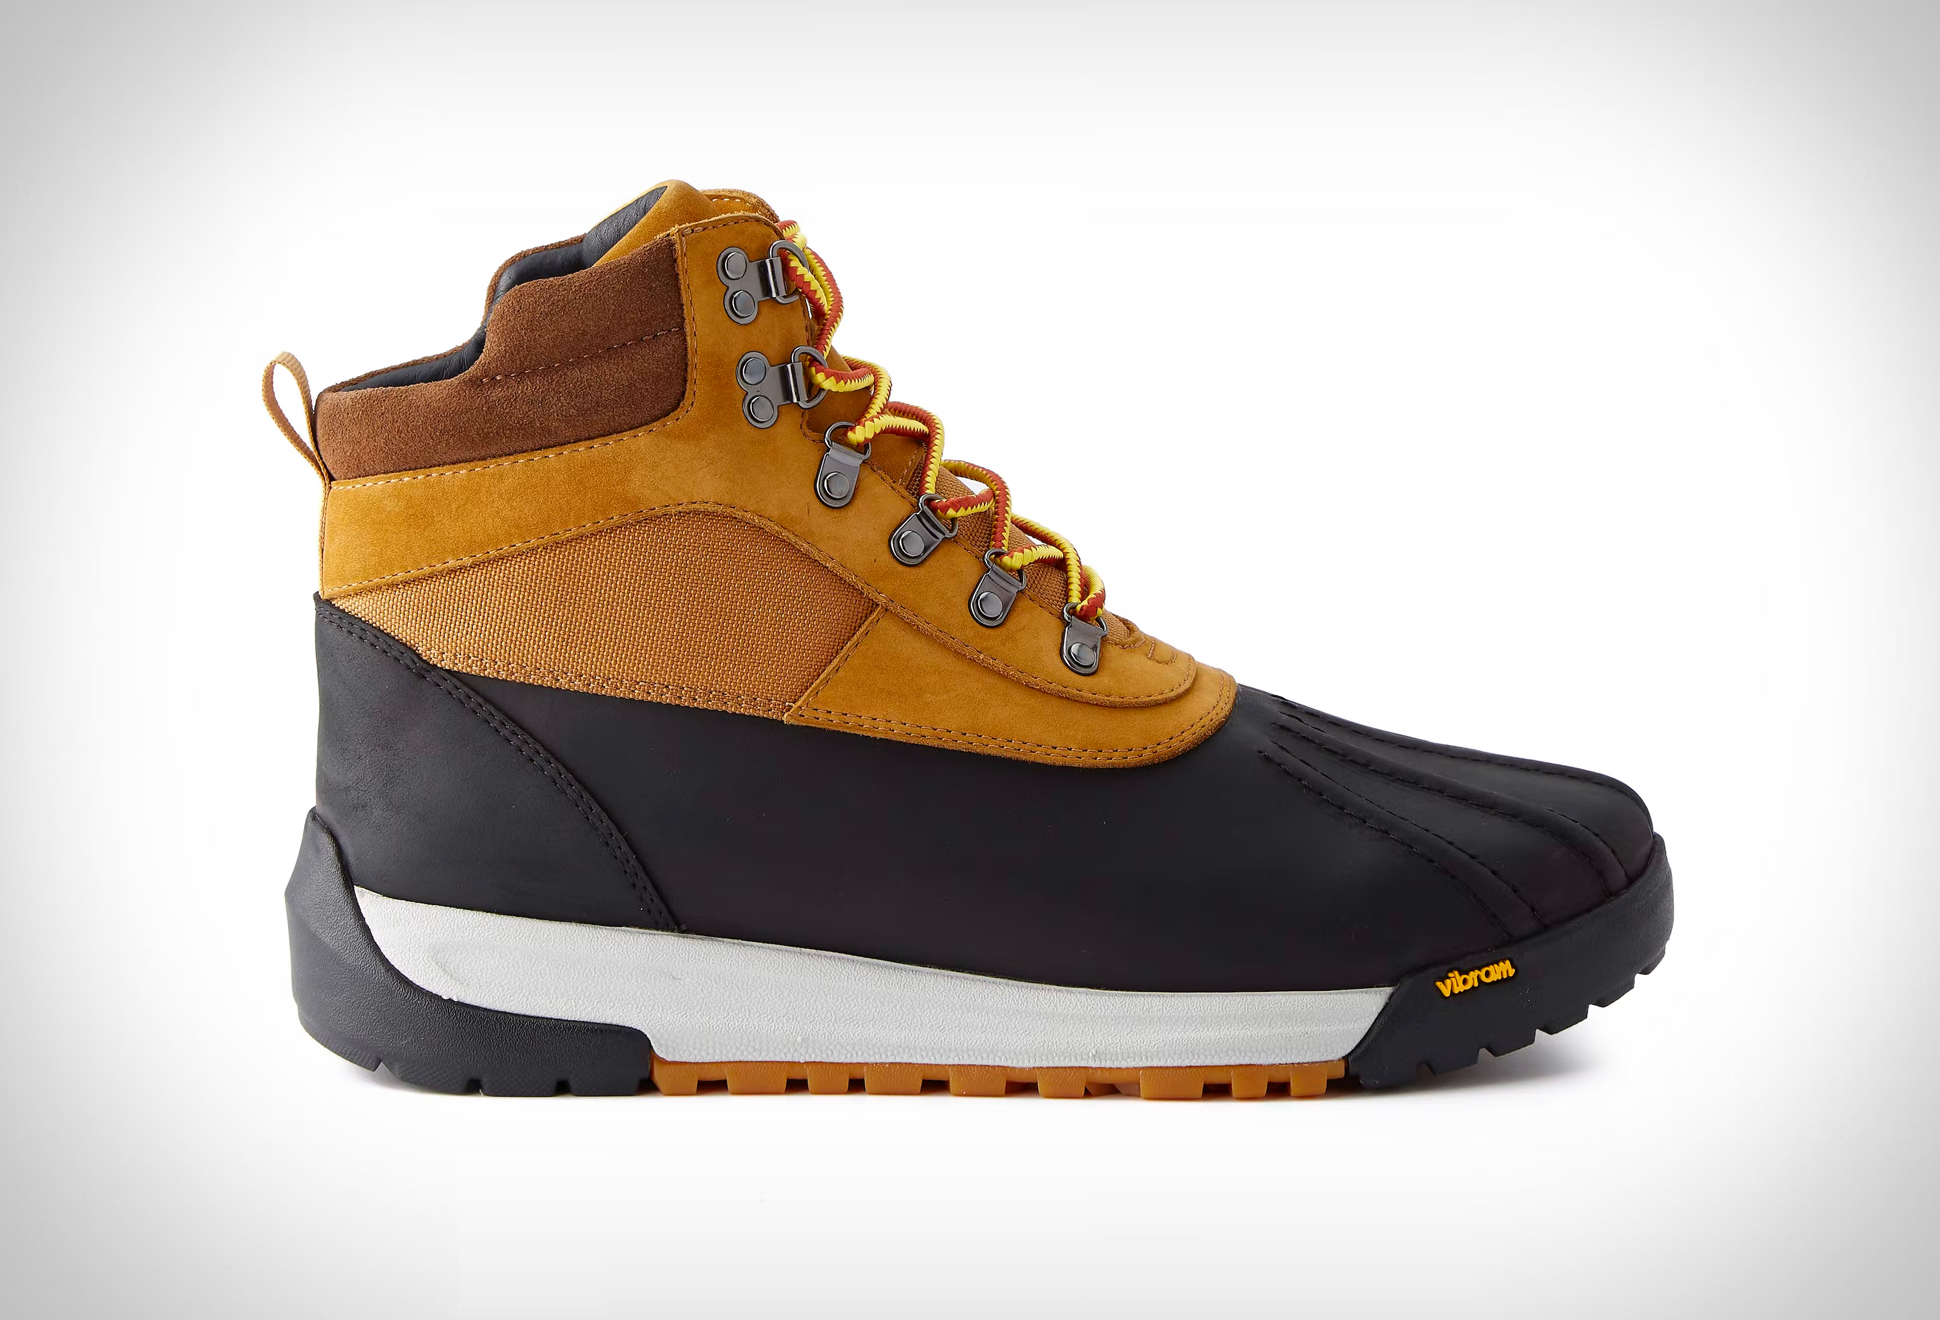 Huckberry All-Weather Overland Boot | Image